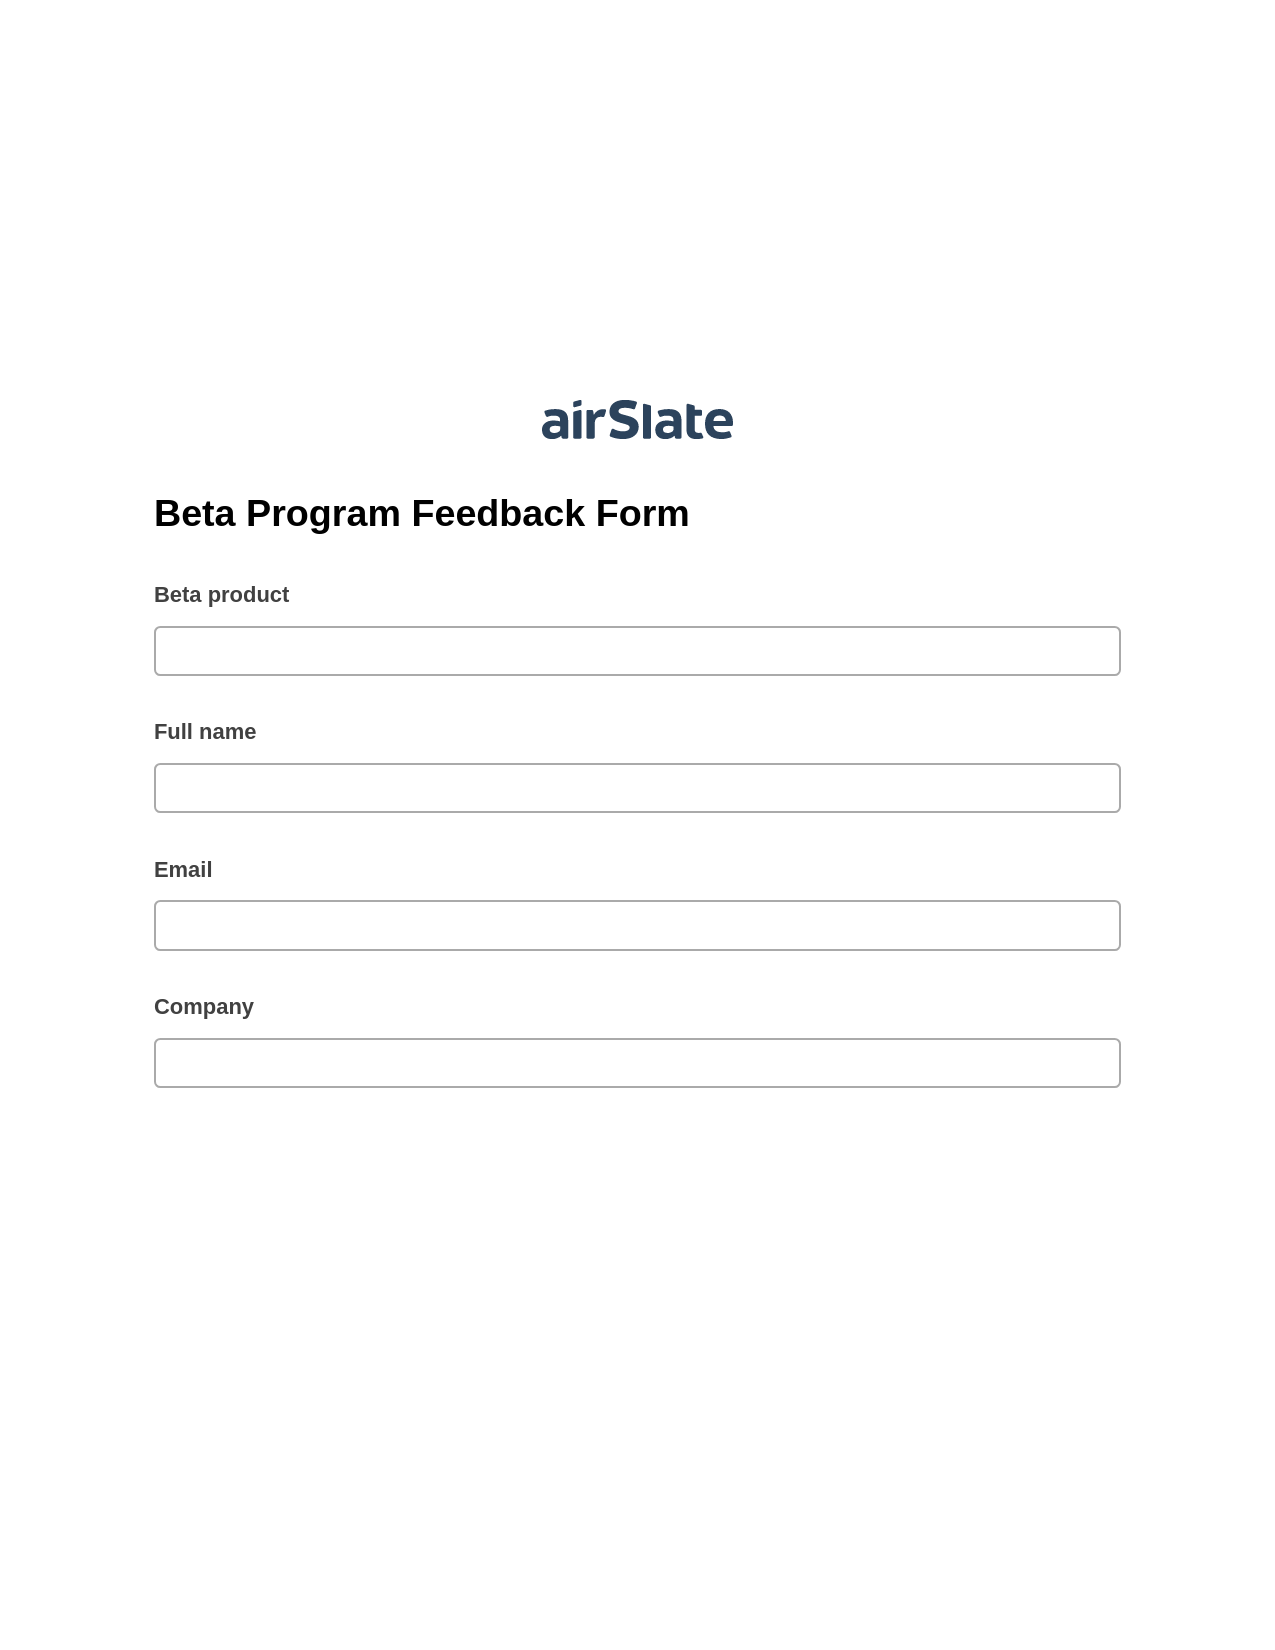 Multirole Beta Program Feedback Form Pre-fill Slate from MS Dynamics 365 Records Bot, Create slate from another Flow Bot, Google Drive Bot